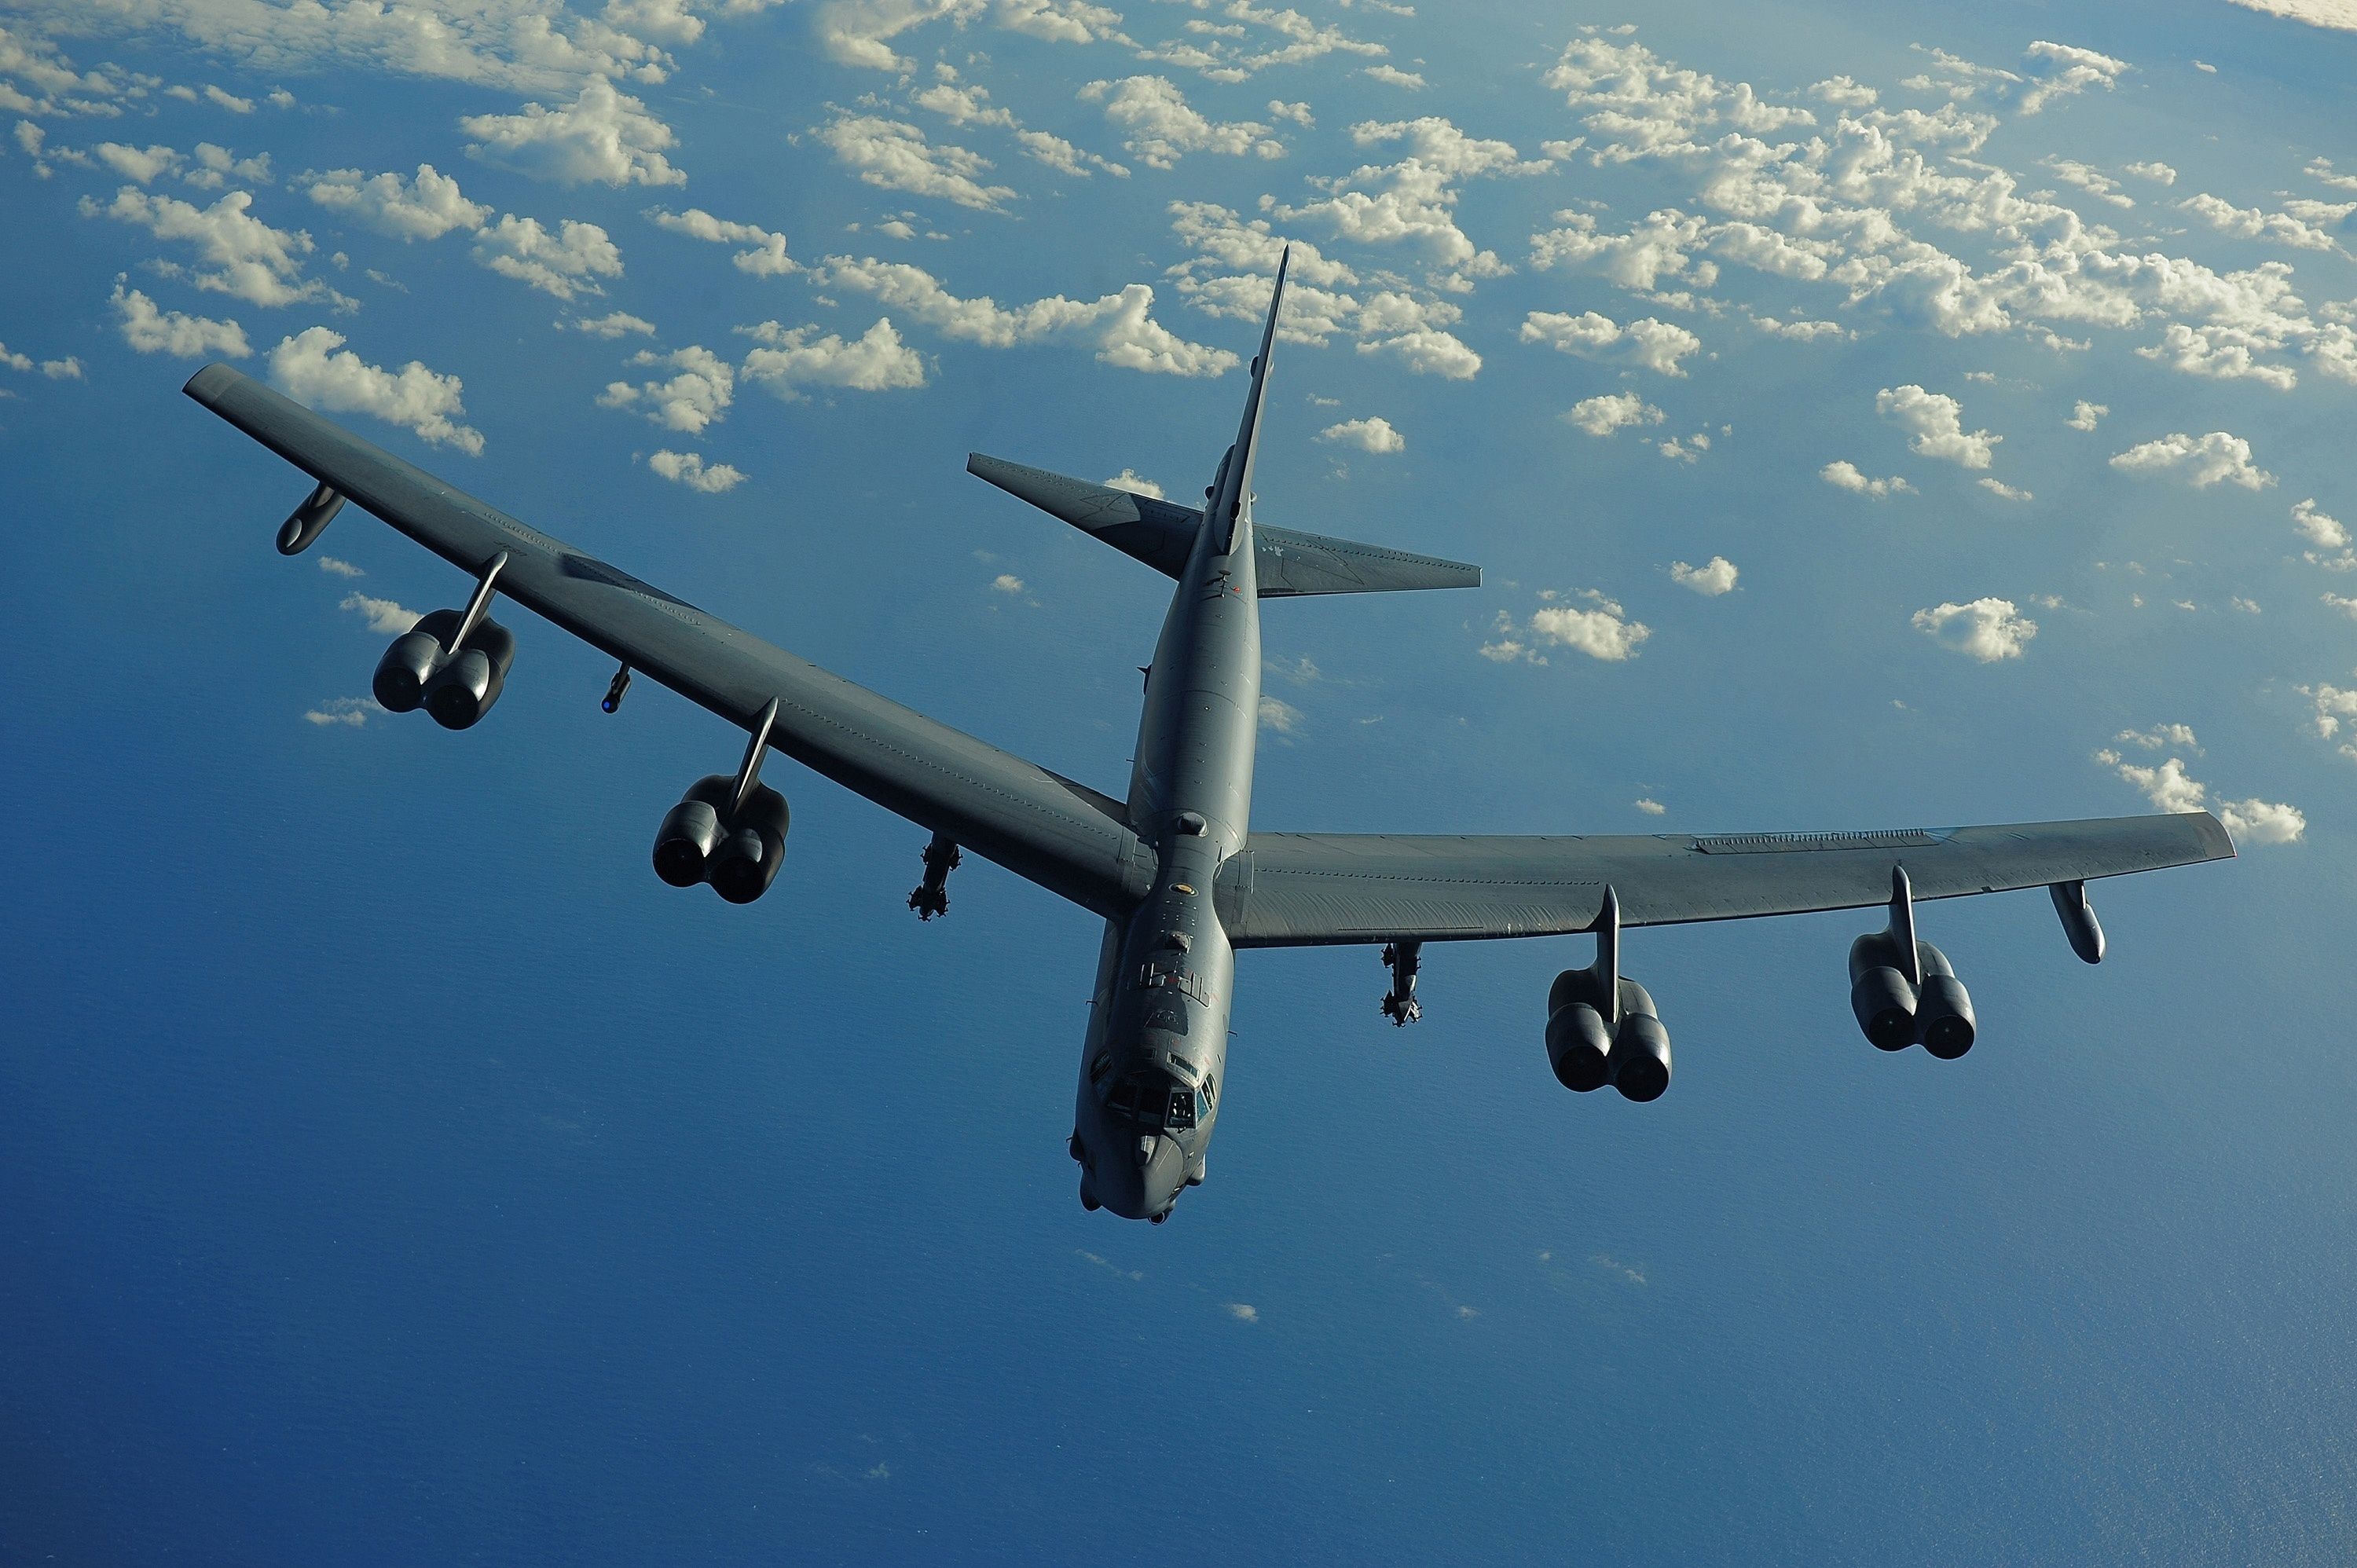 a complete history of the b-52 bomber in the us air force